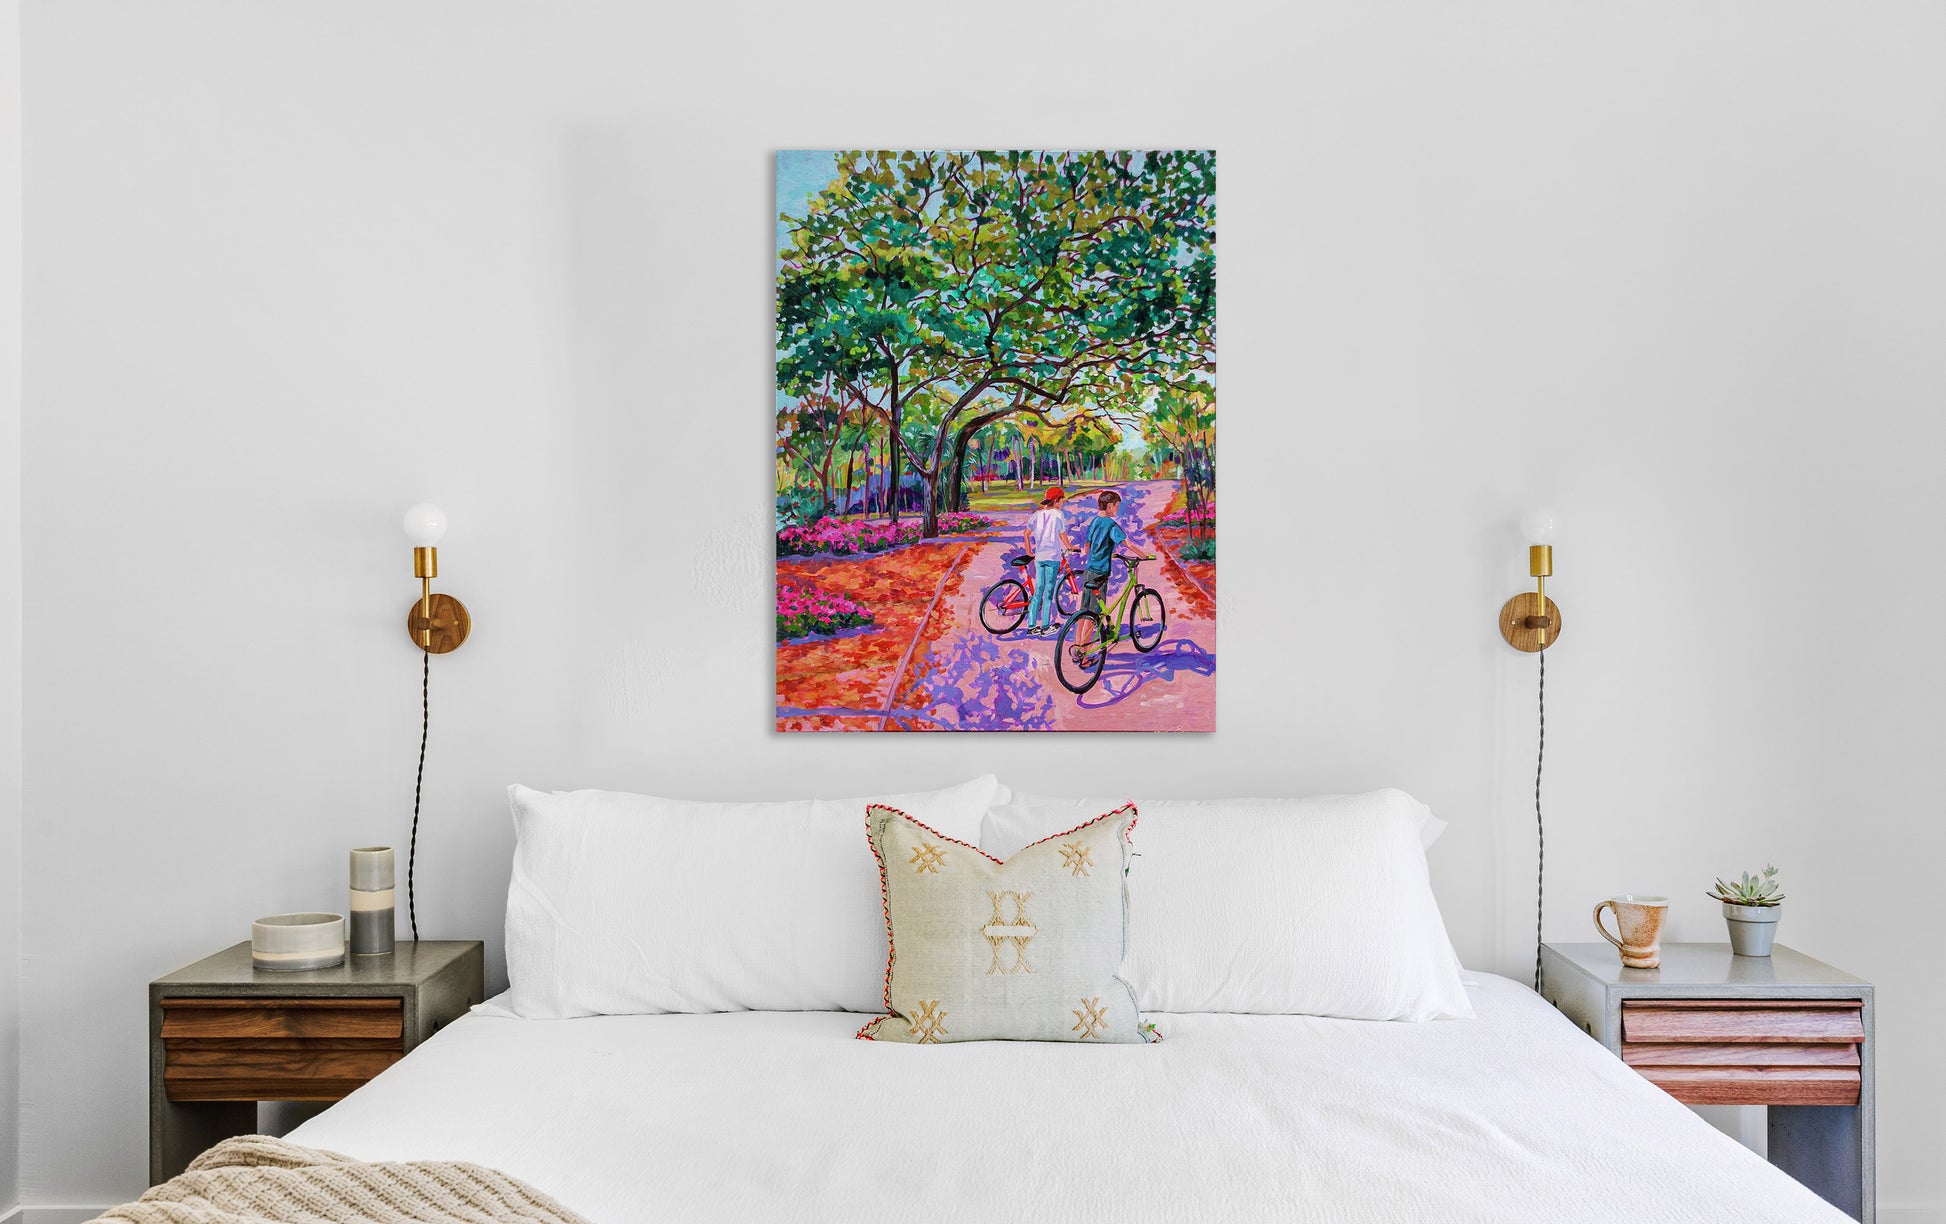 Beautiful journey painting above bed